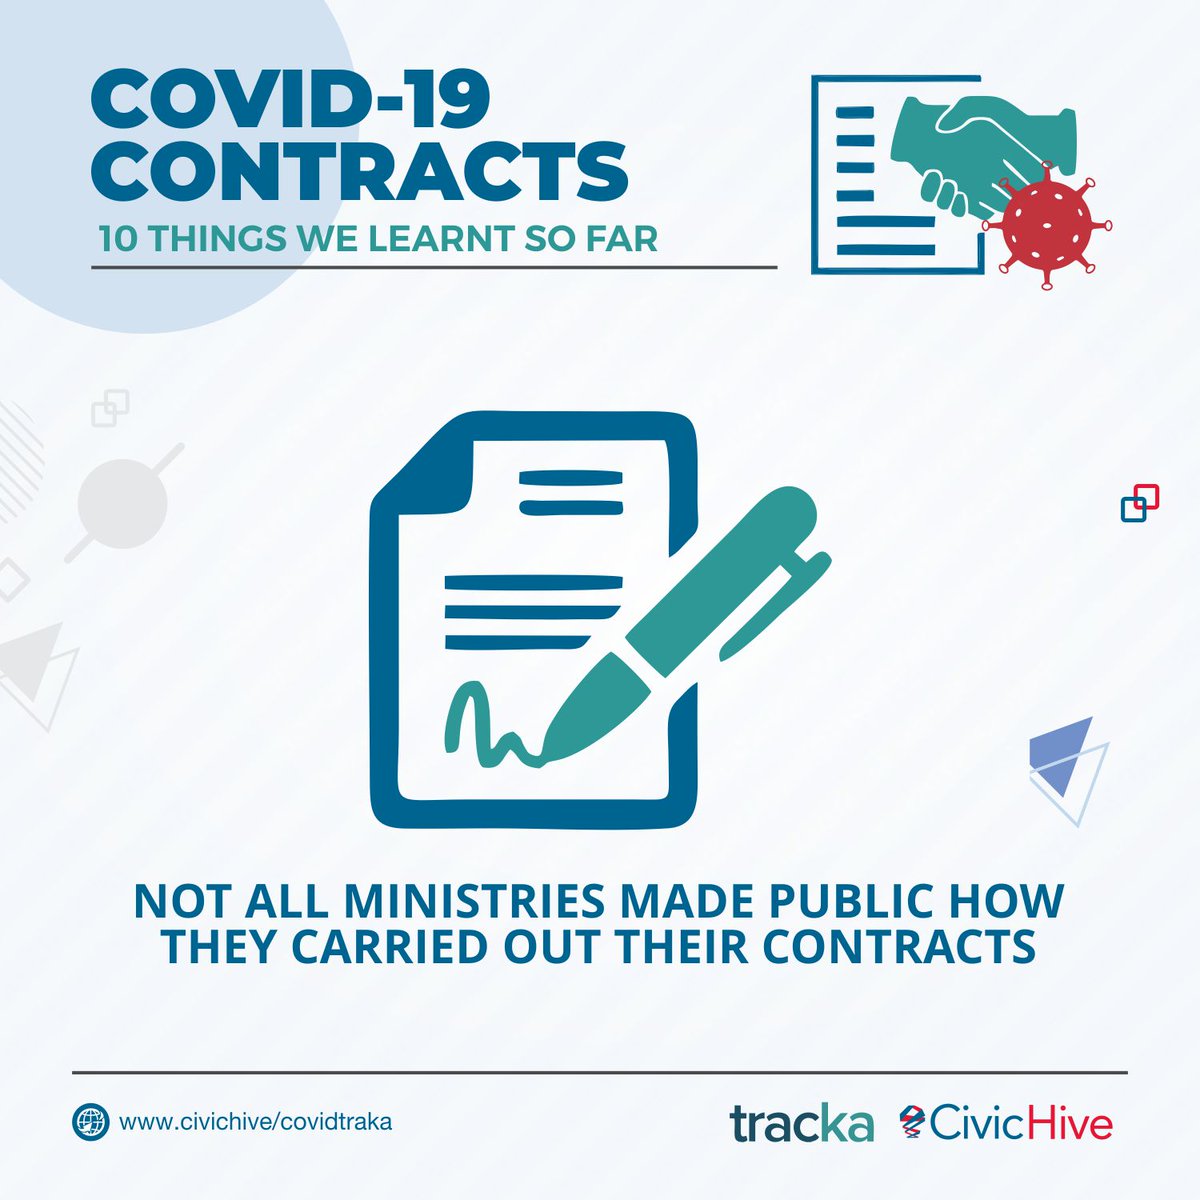 Most of the MDAs involved do not make public their procurement process. We believe this would have been competitive if all projects we made open to all. With the way things are, it is nearly impossible to seek transparency and accountability.  #CovidFunds  #AskQuestions